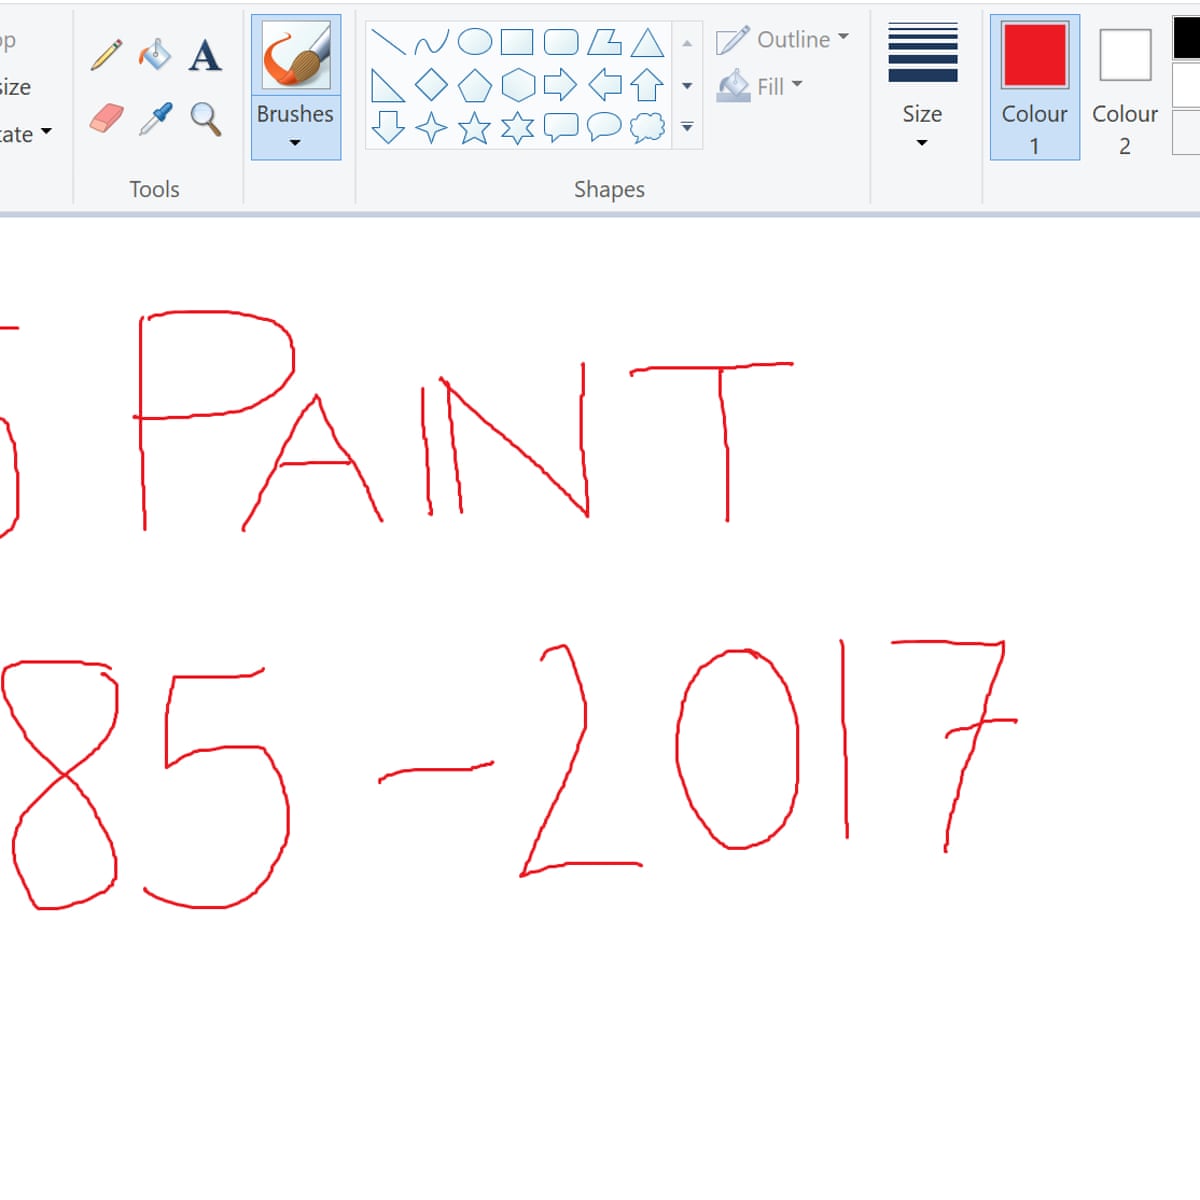 Microsoft Paint To Be Killed Off After 32 Years | Windows 10 | The Guardian